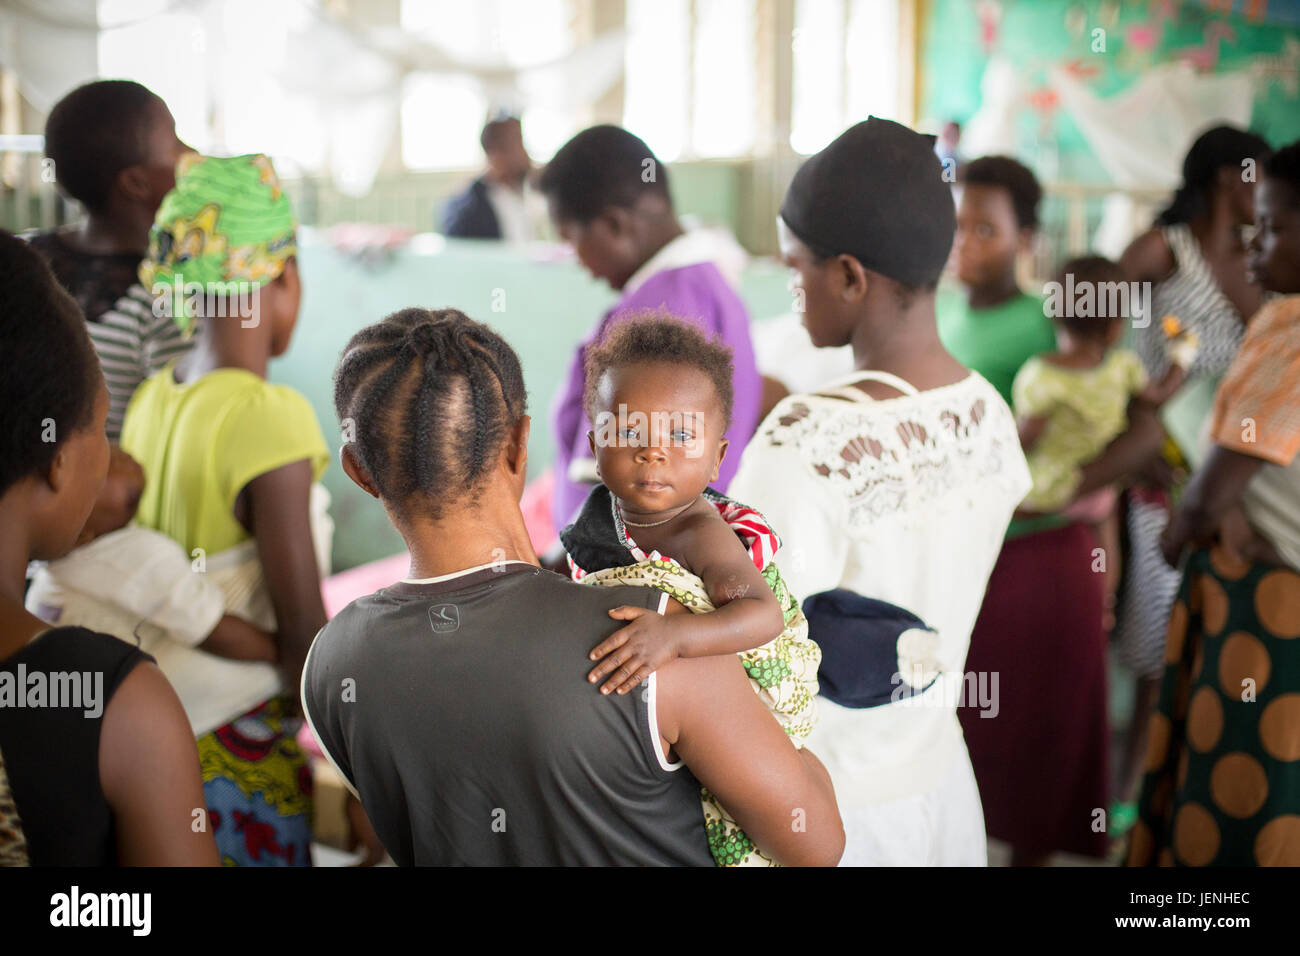 Patients wait to be seen at an underserved hospital in Bundibugyo, Uganda. Stock Photo